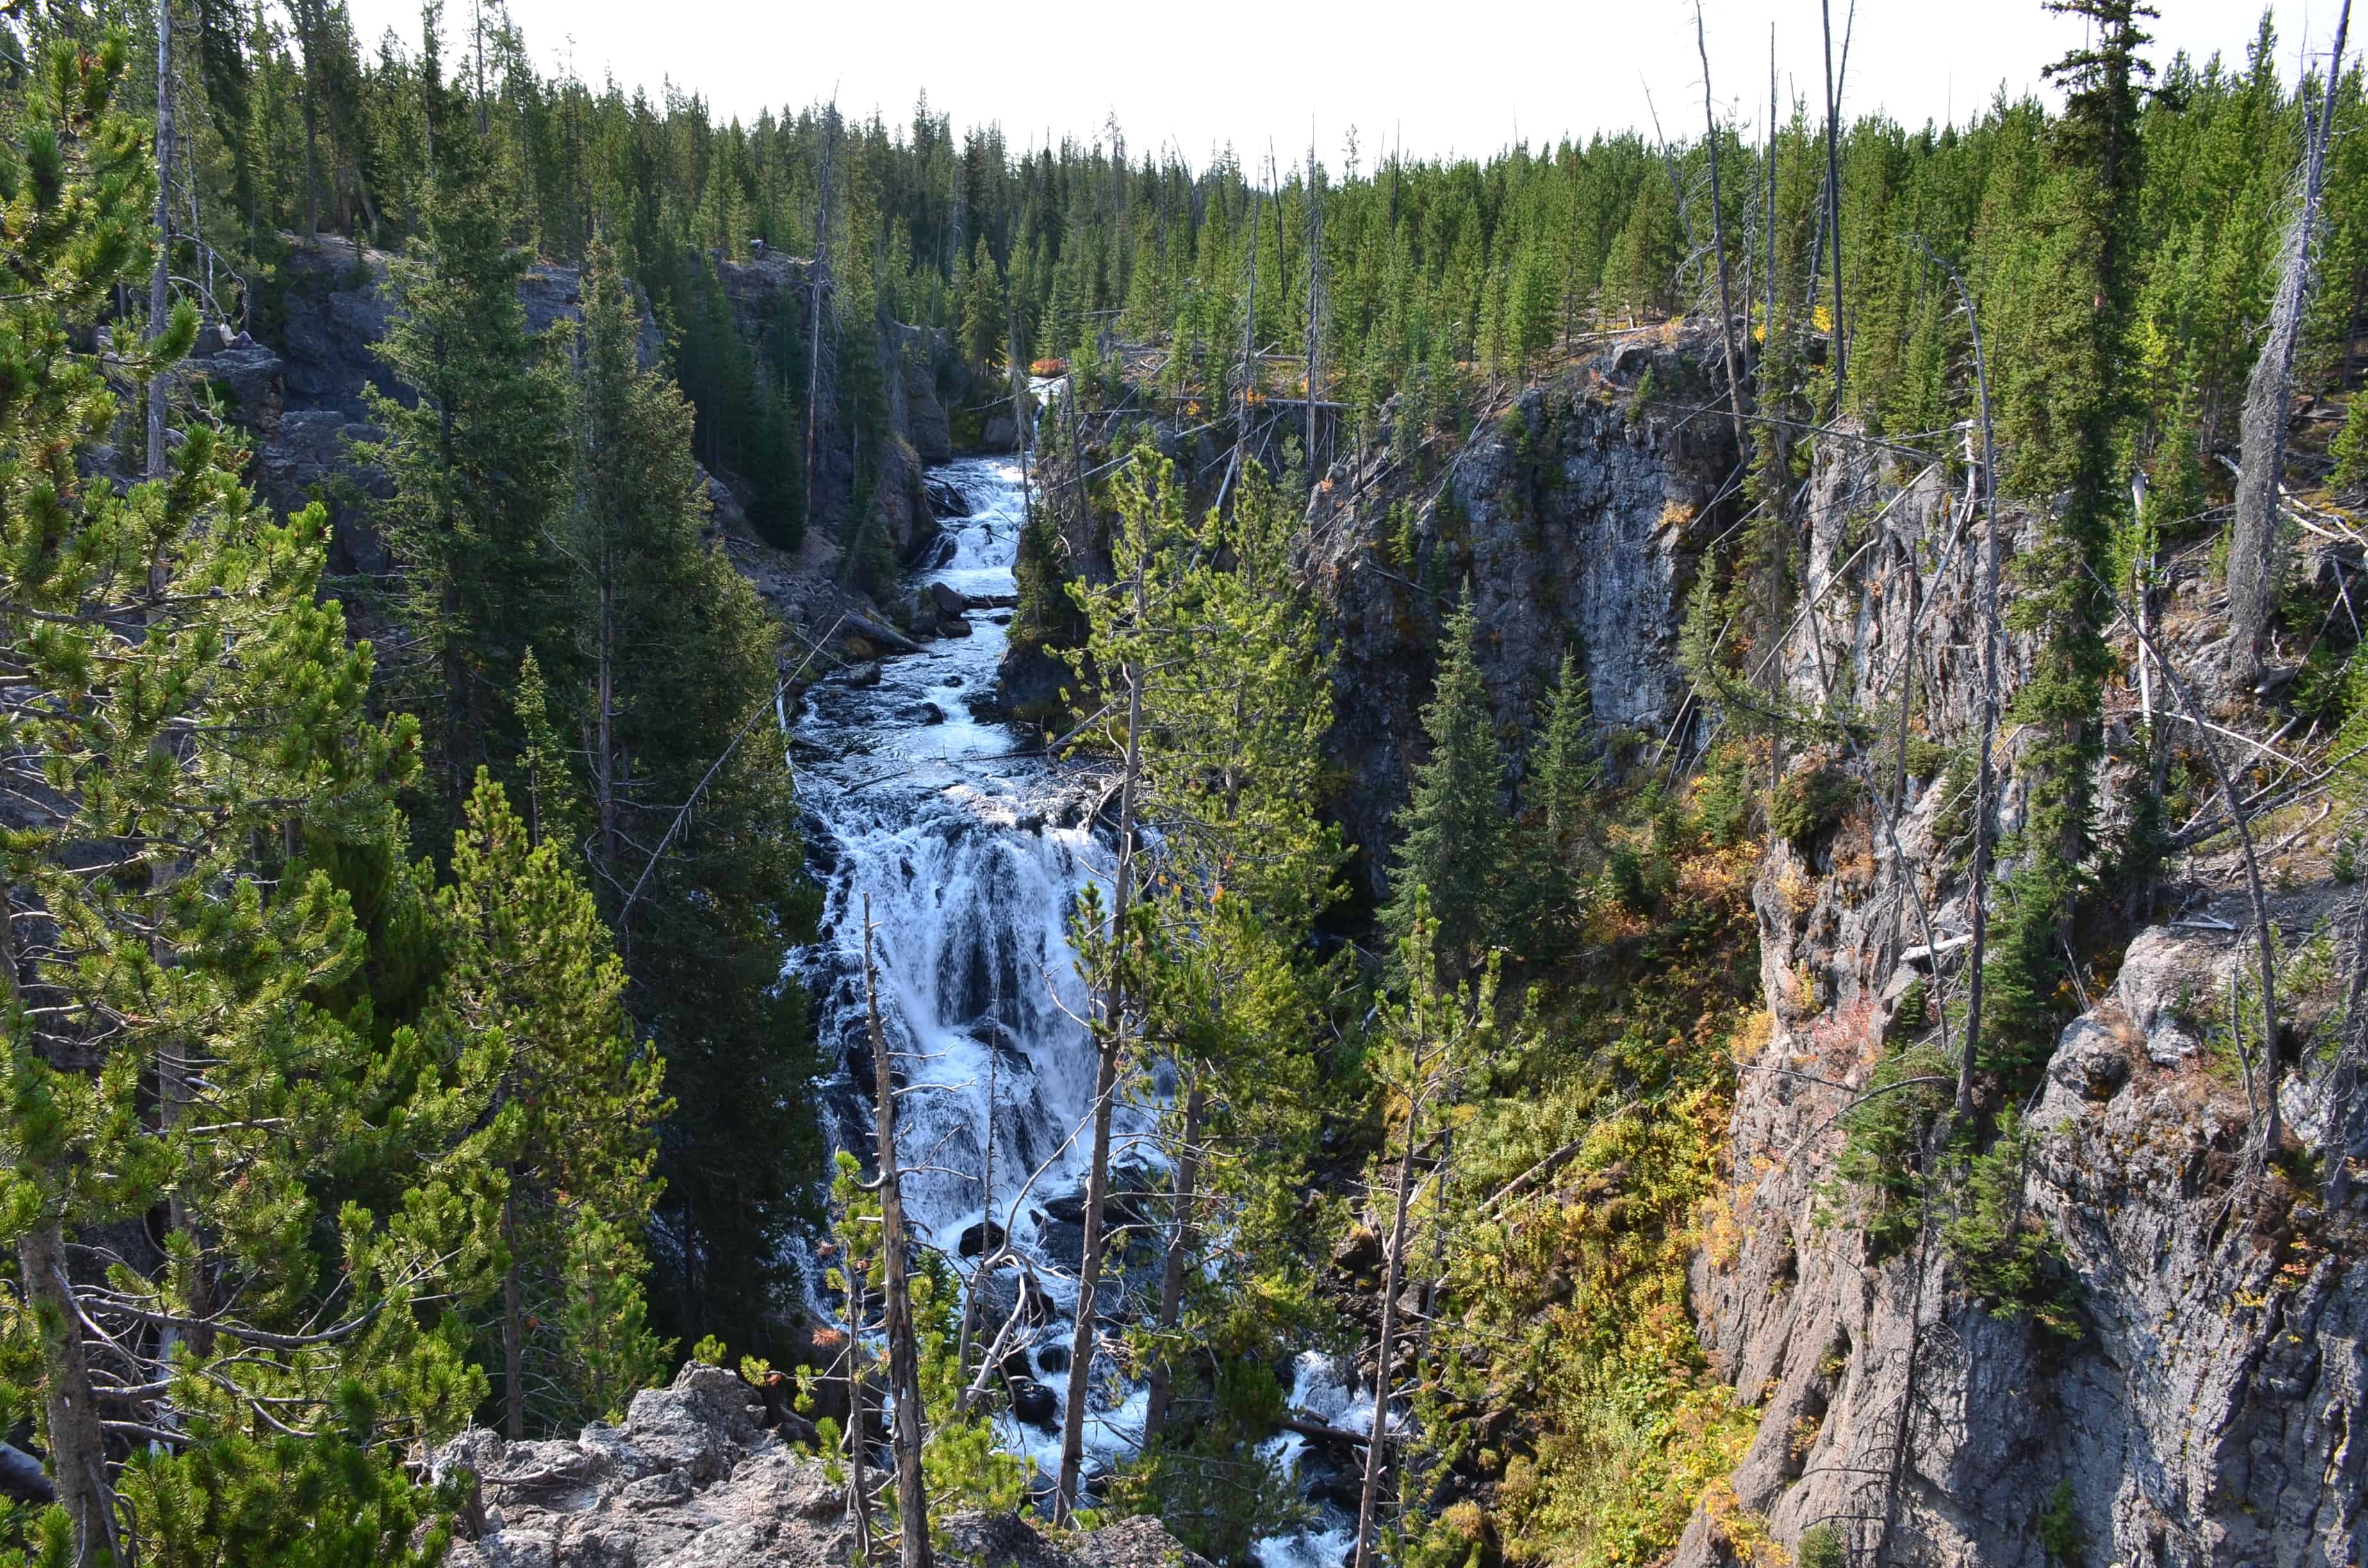 Kepler Cascades in Yellowstone National Park, Wyoming